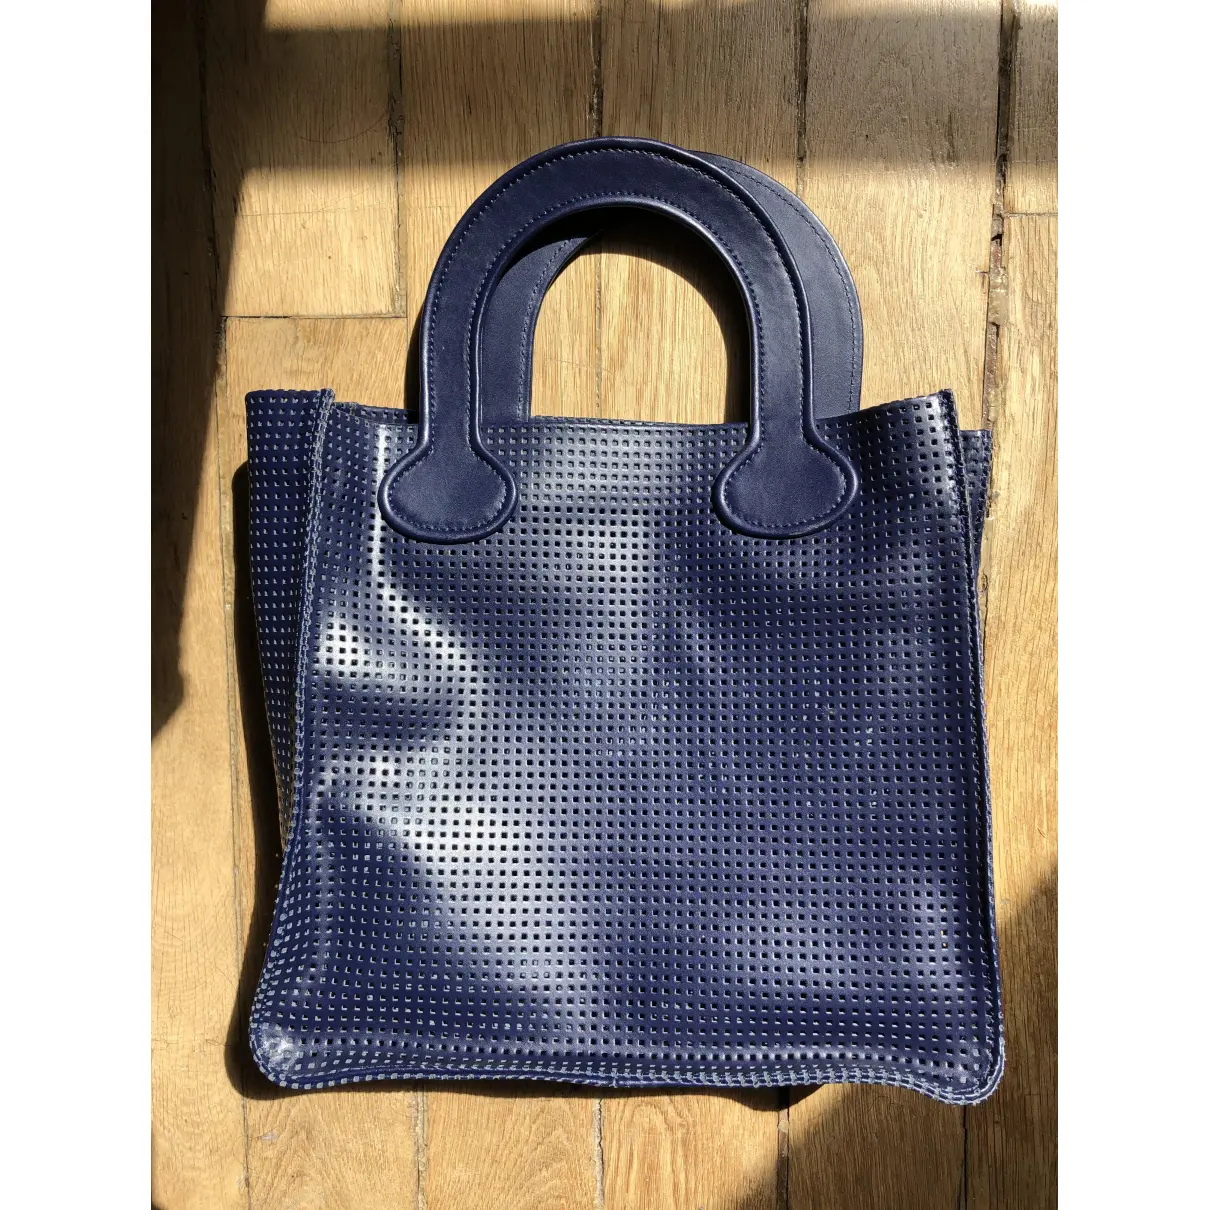 Buy Courrèges Leather tote online